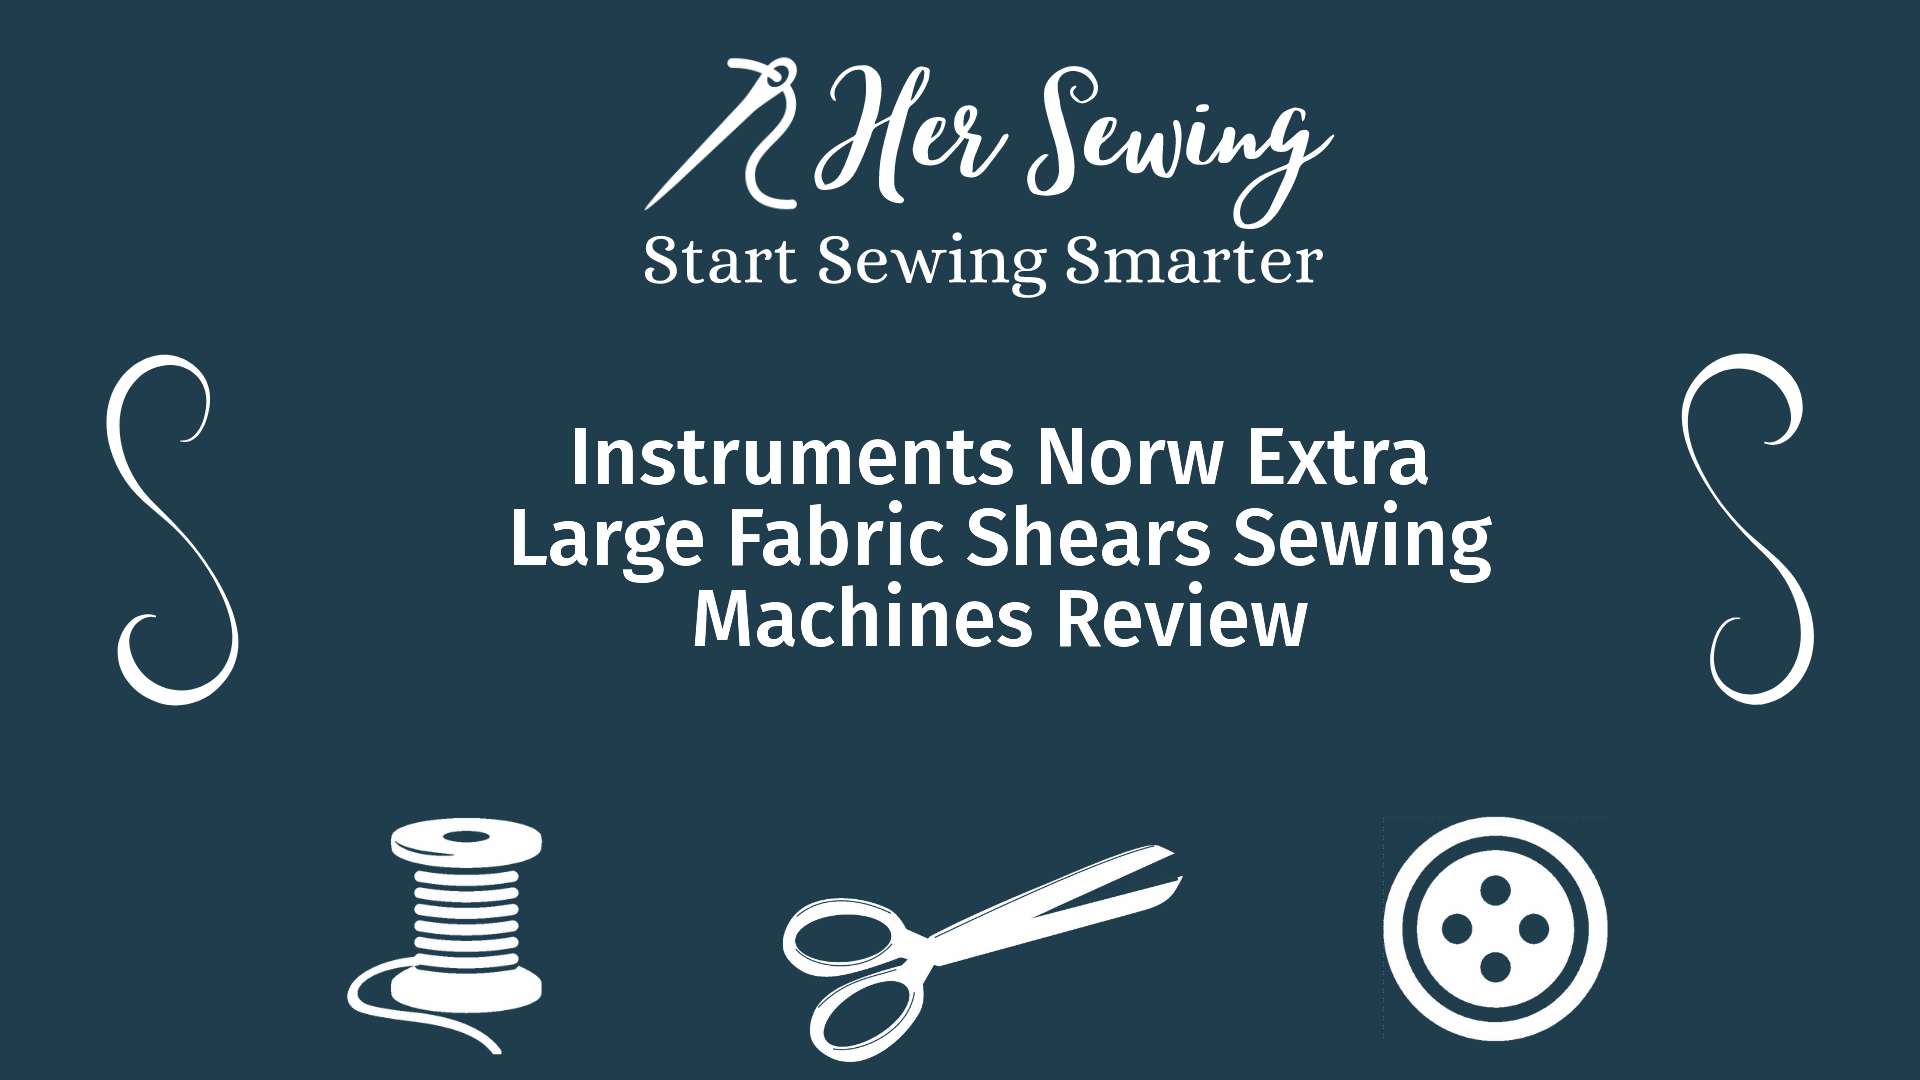 Instruments Norw Extra Large Fabric Shears Sewing Machines Review